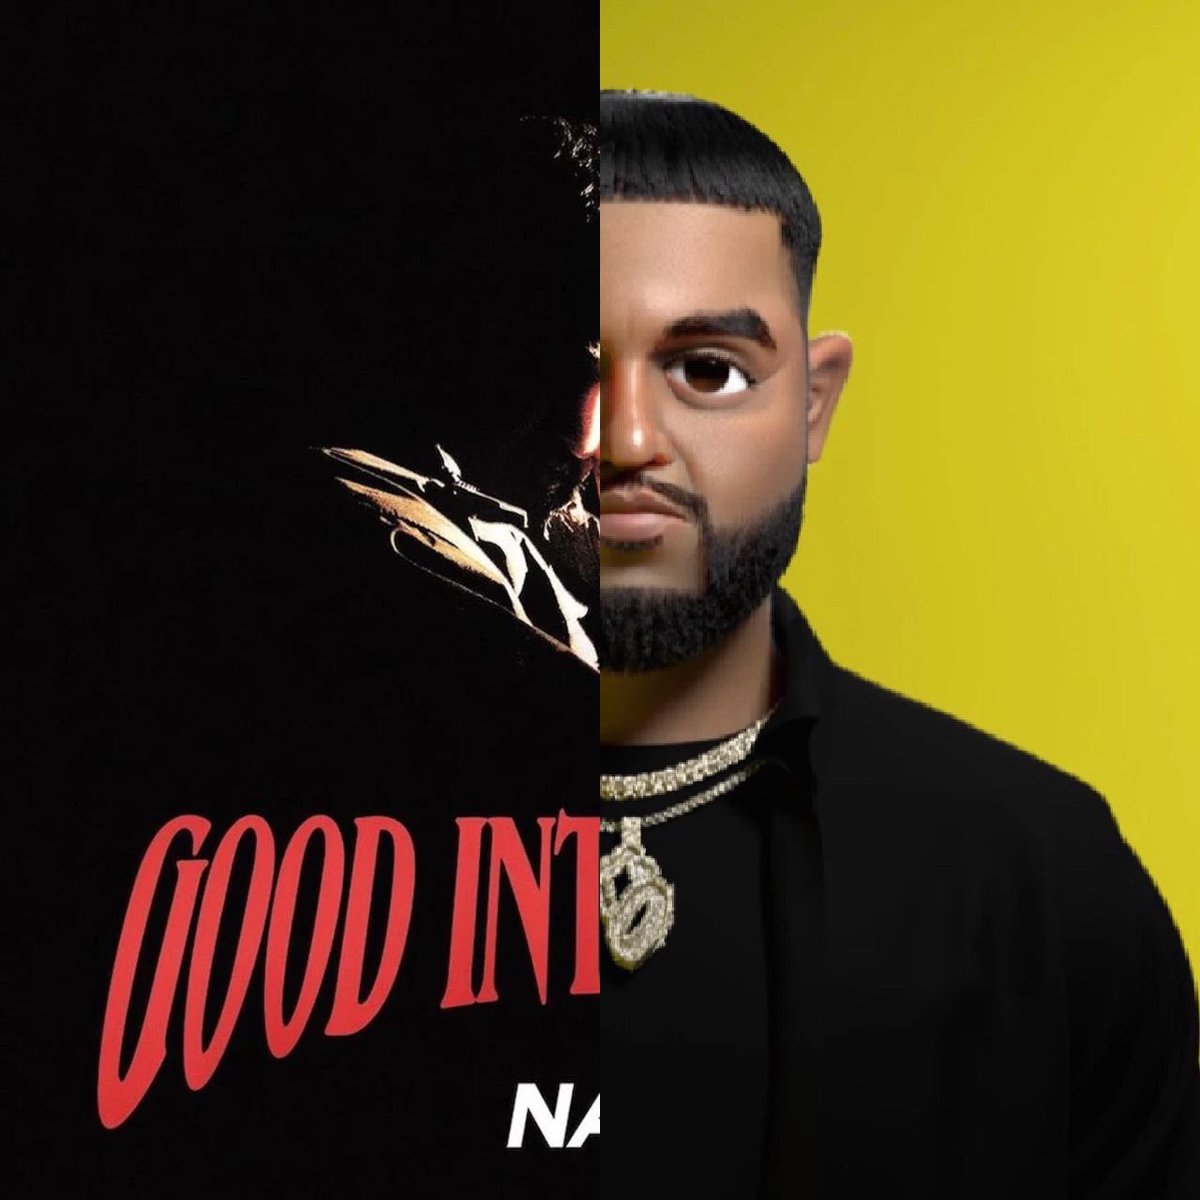 #4. Nav - Good Intentions/Brown Boy 2Rating: 1.5/10Short Review:Nav has some bangers on this album that I enjoy but overall this project is a mess, the same robotic flows put me to sleep everytime. Boring asf